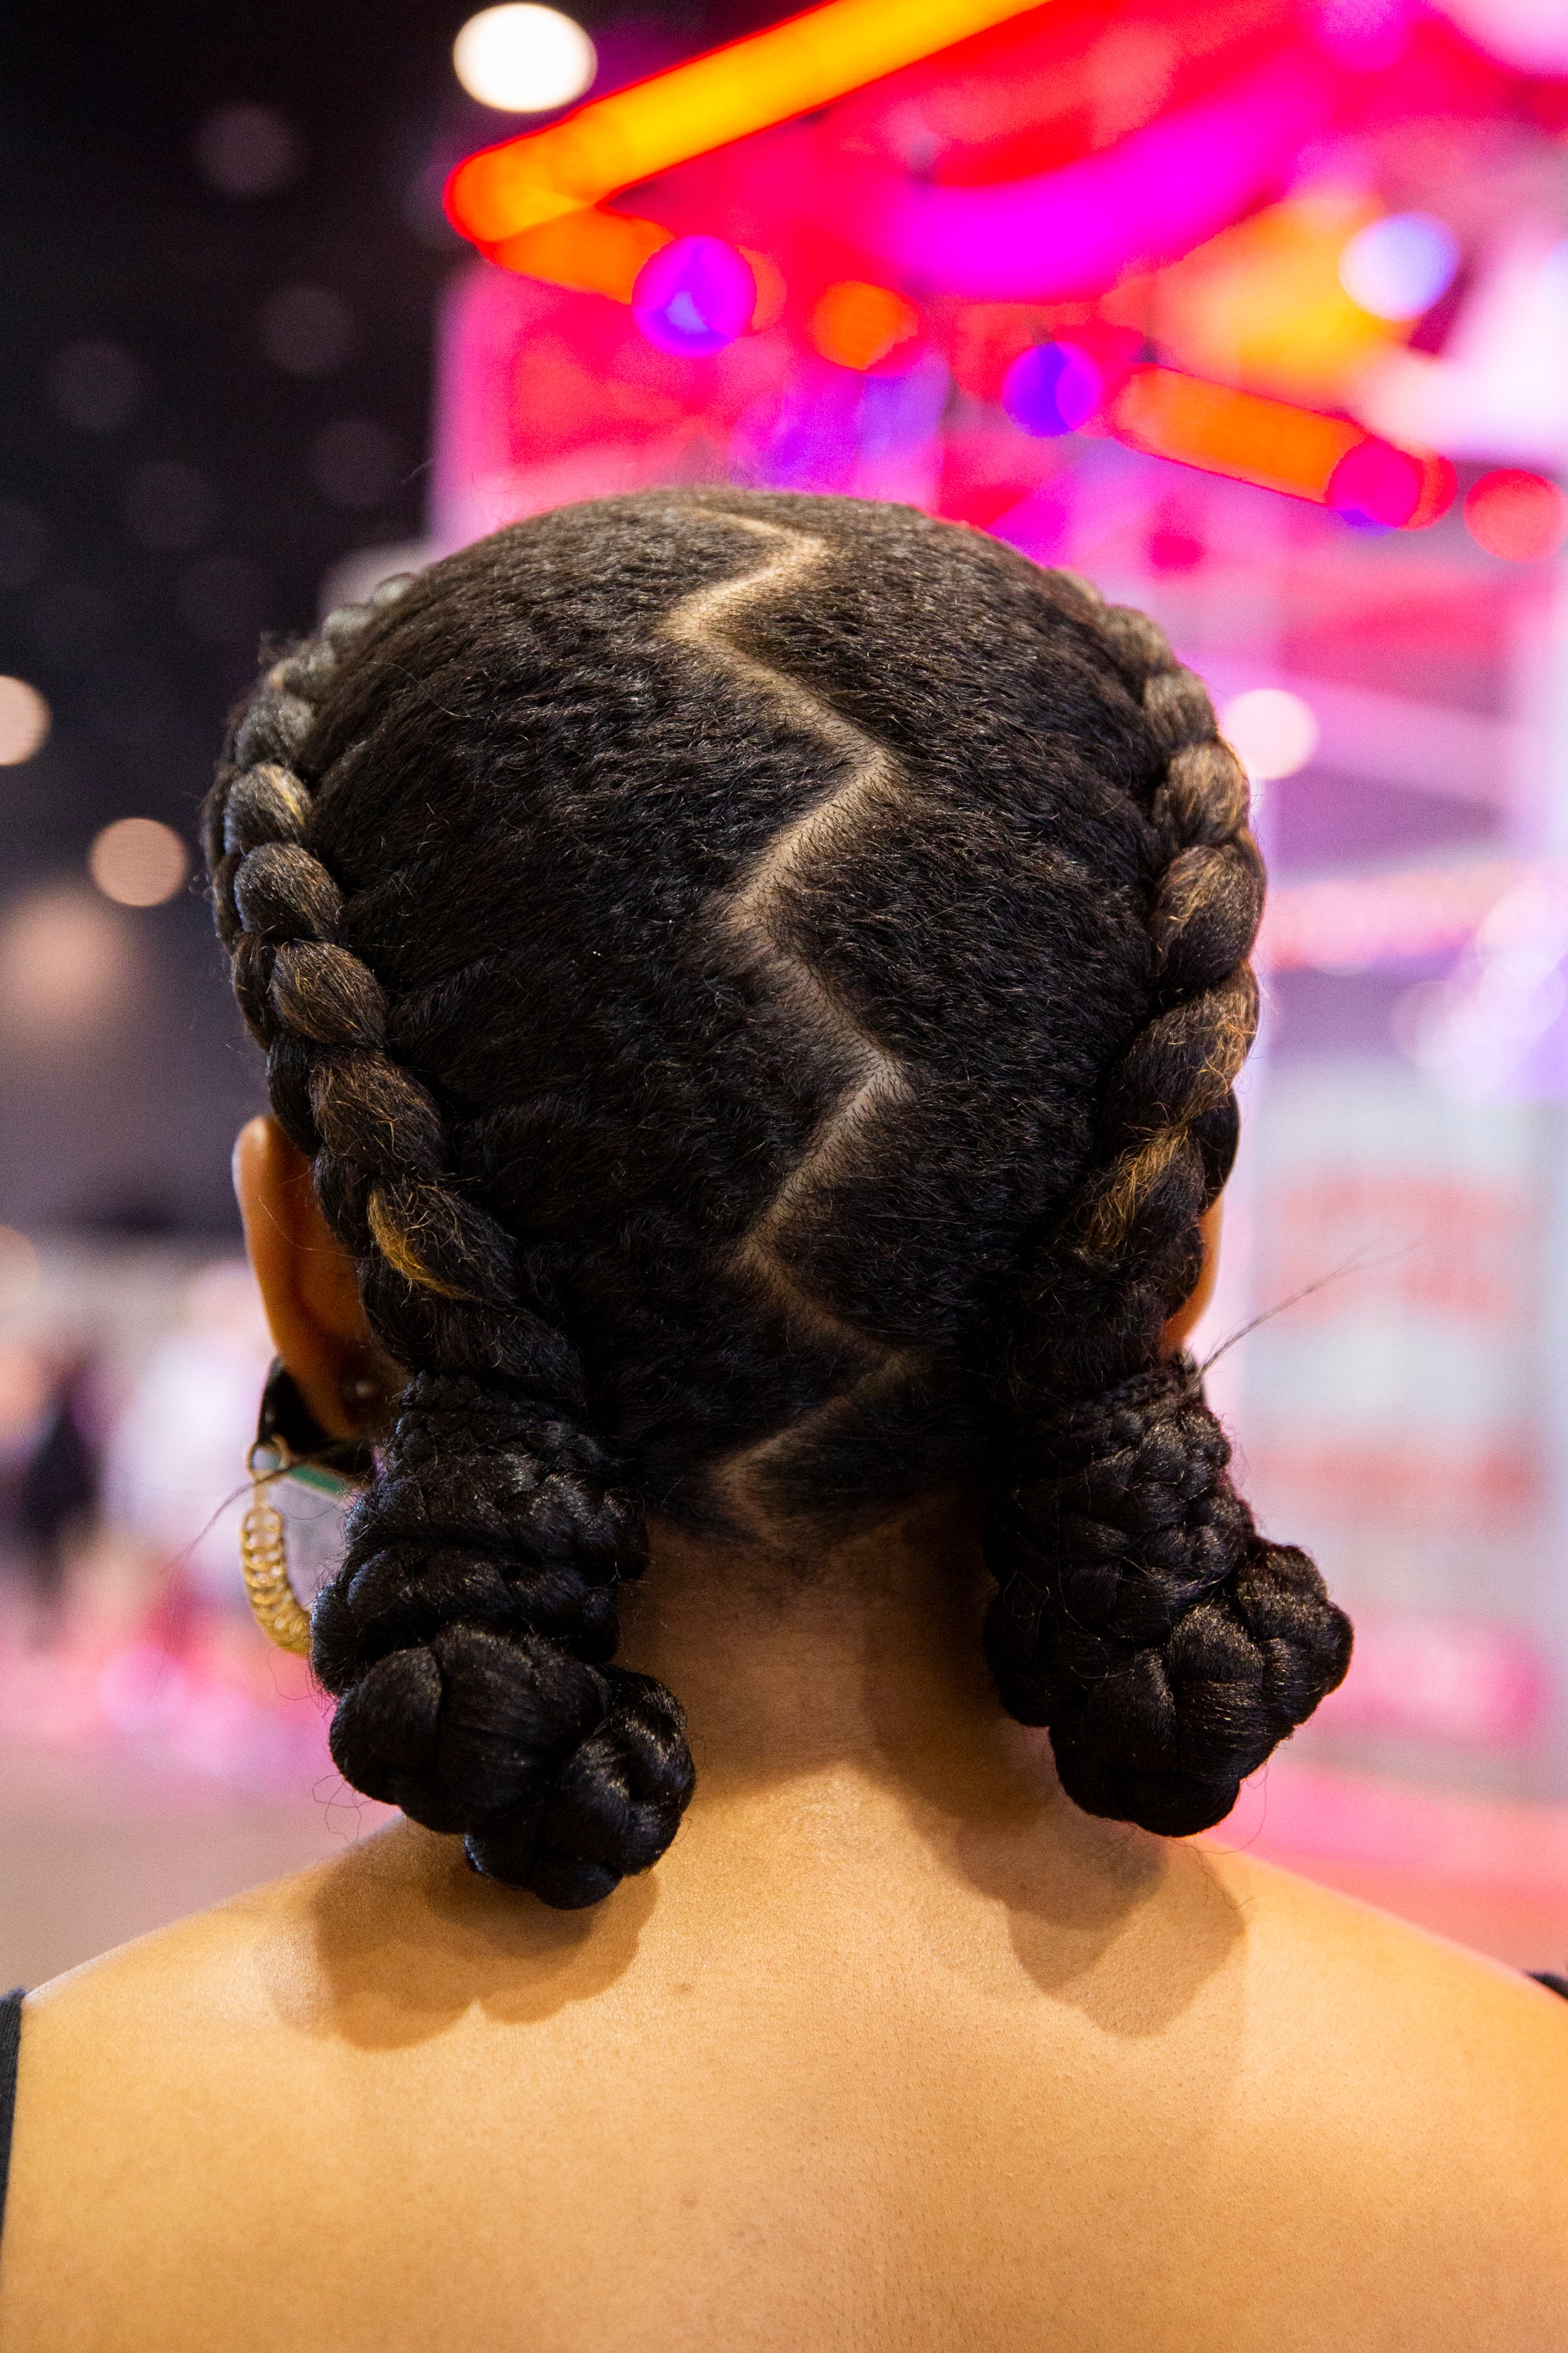 The Best Of Beauty From Complexcon 2019